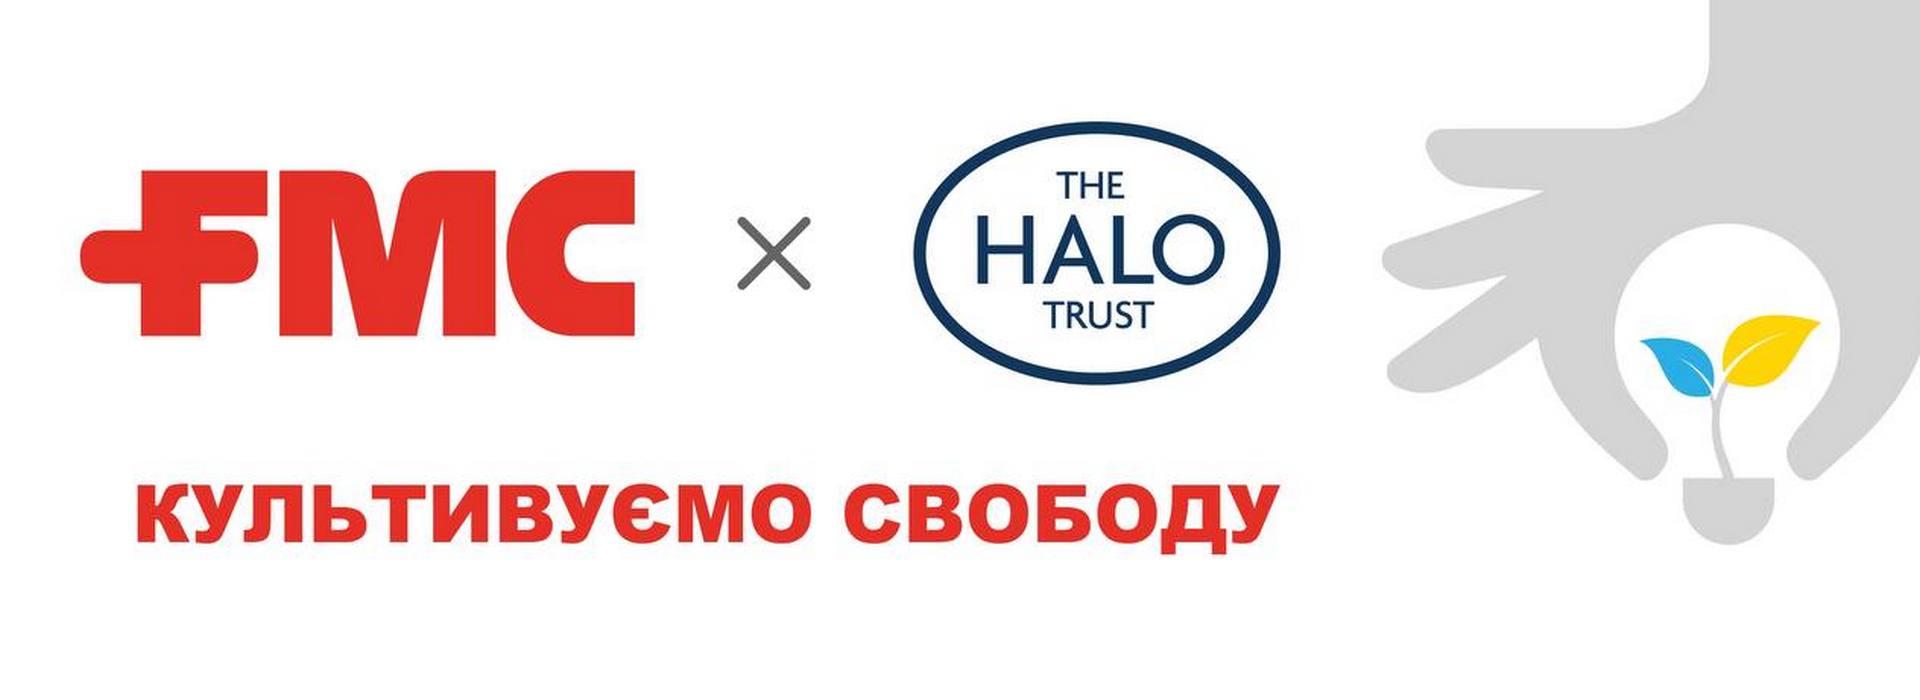 FMC Corporation and The HALO Trust Join Forces to Improve Farm Safety Through Demining Programs in Ukraine